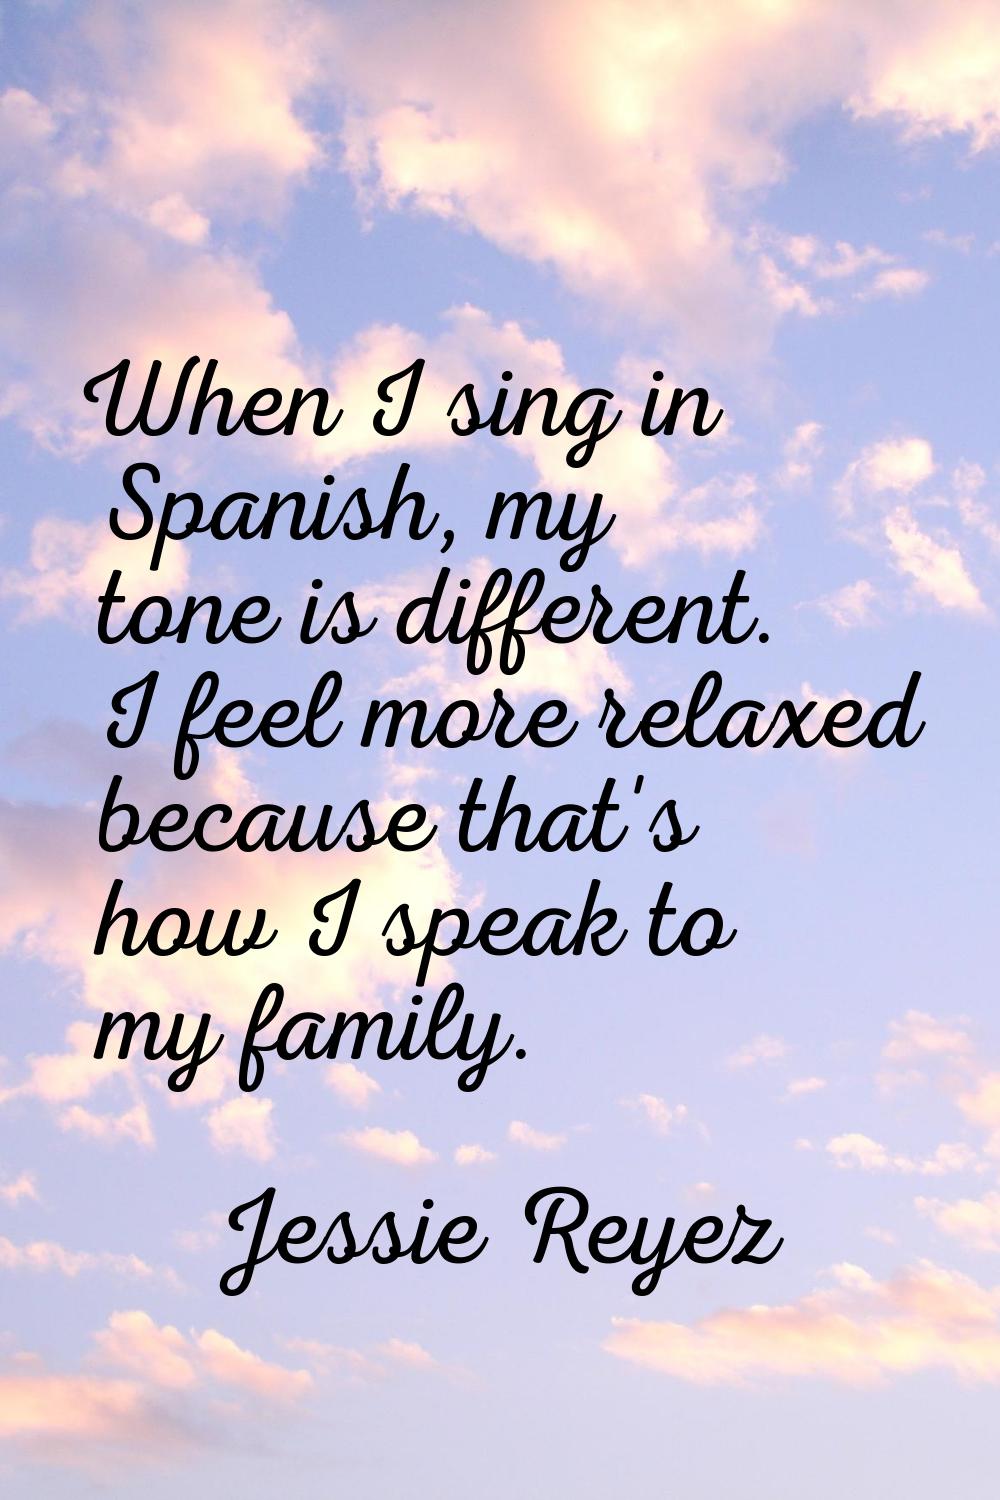 When I sing in Spanish, my tone is different. I feel more relaxed because that's how I speak to my 